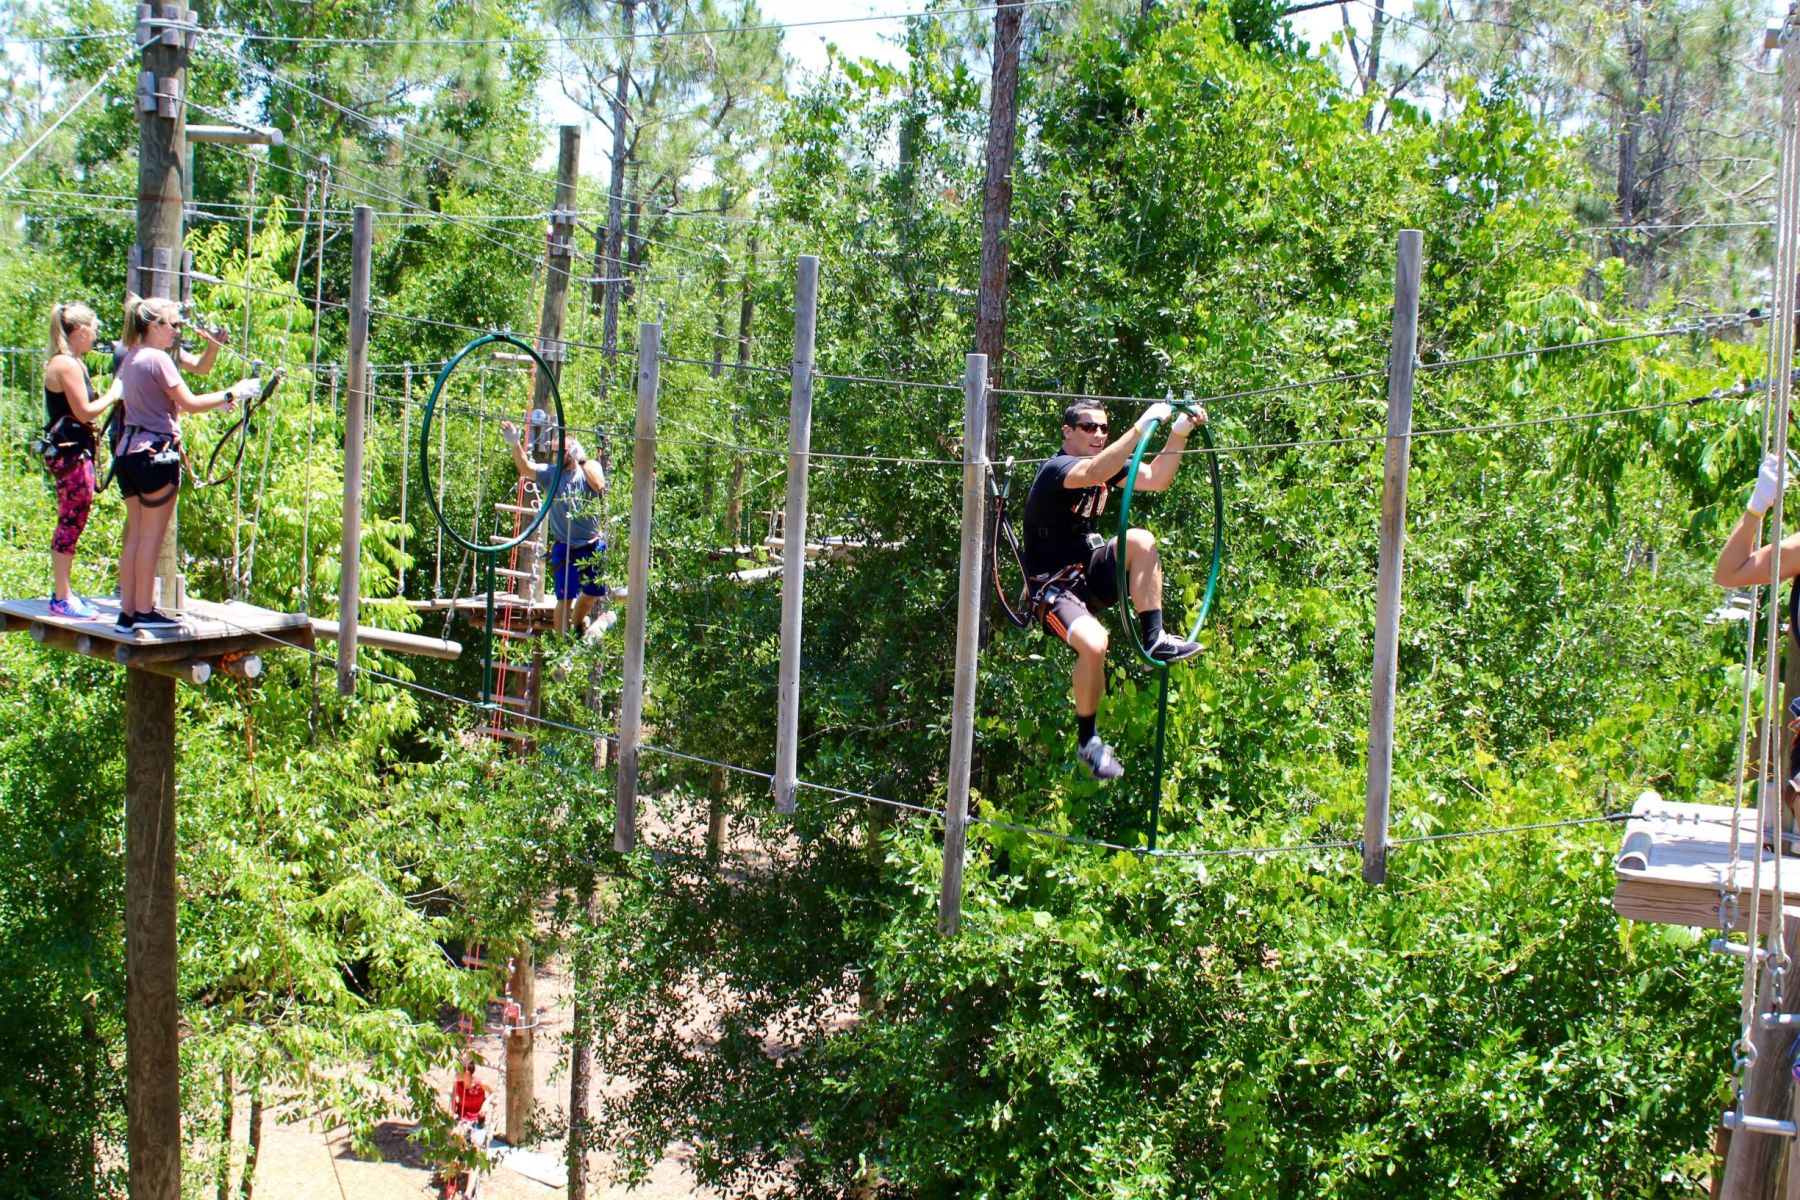 Top 5 Adventure Activities for Couples to Enjoy in Florida - Find Home Away